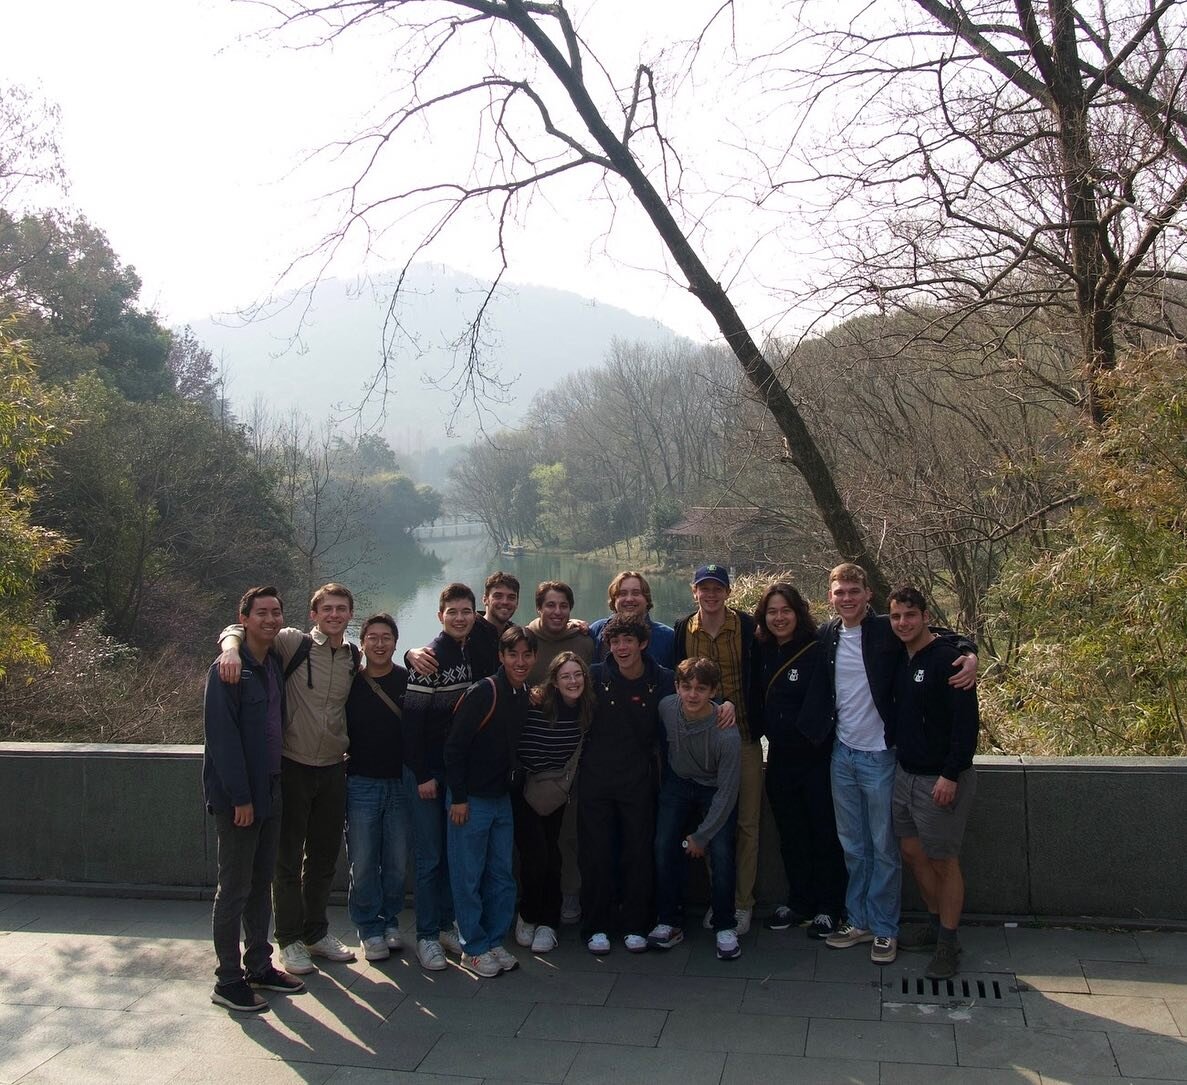 SPRING TOUR VOL. 1 &mdash; SH/HZ

Our first stop on China tour brought us to the renowned city of Shanghai, a city with more lights, cameras, and actions than we could&rsquo;ve ever anticipated. As soon as we arrived in Shanghai, we were greeted by t